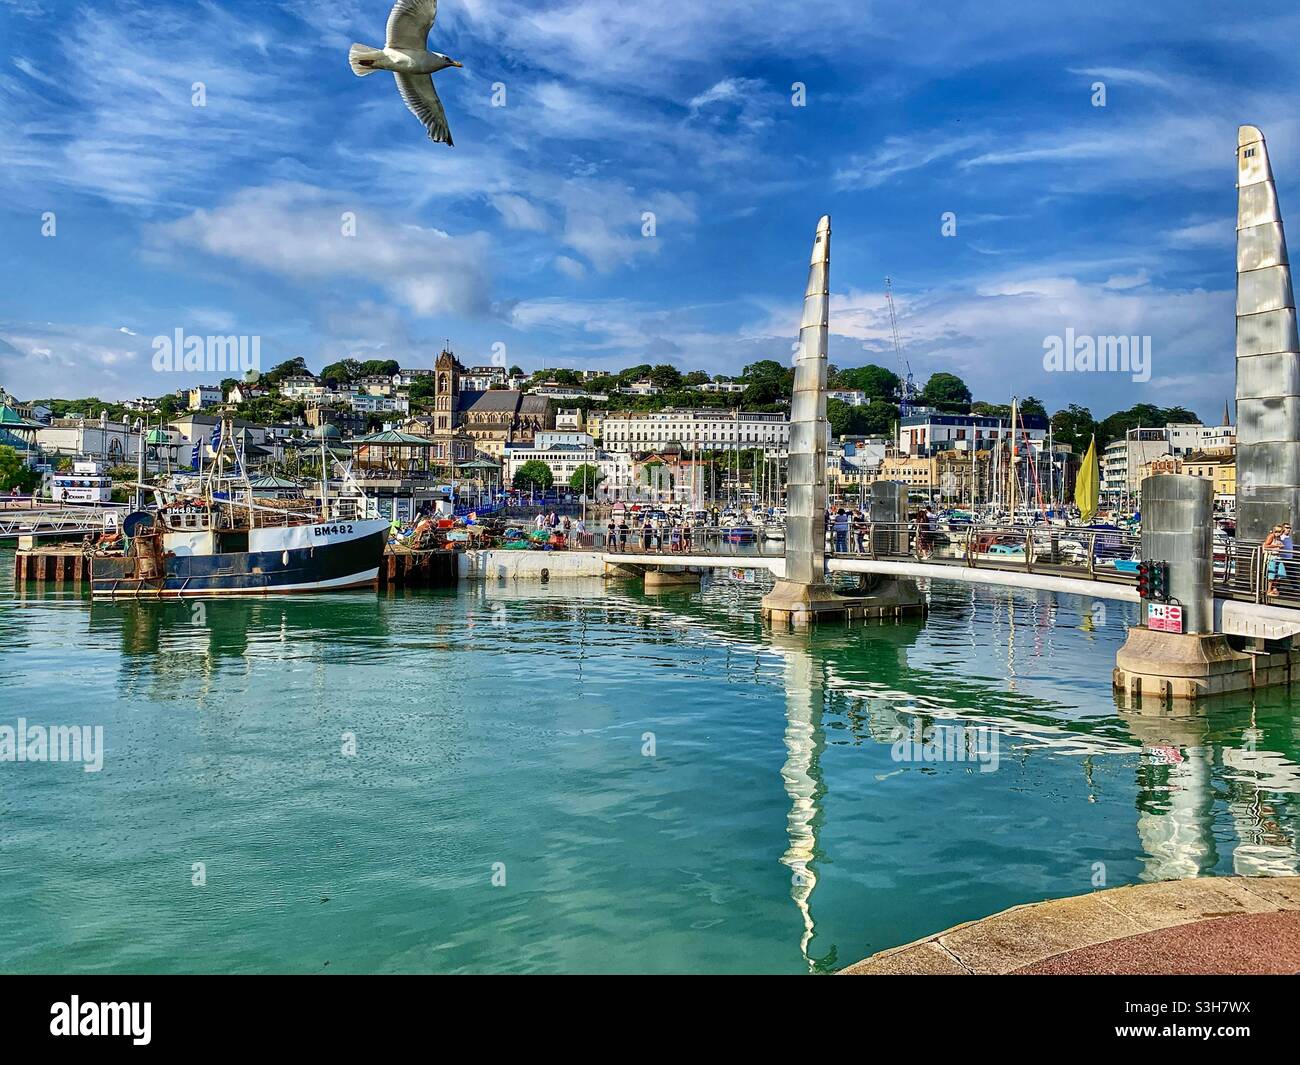 Summertime at Torquay Harbour. A seagull flies over the sky line of the town on a sunny day. Turquoise water. Stock Photo